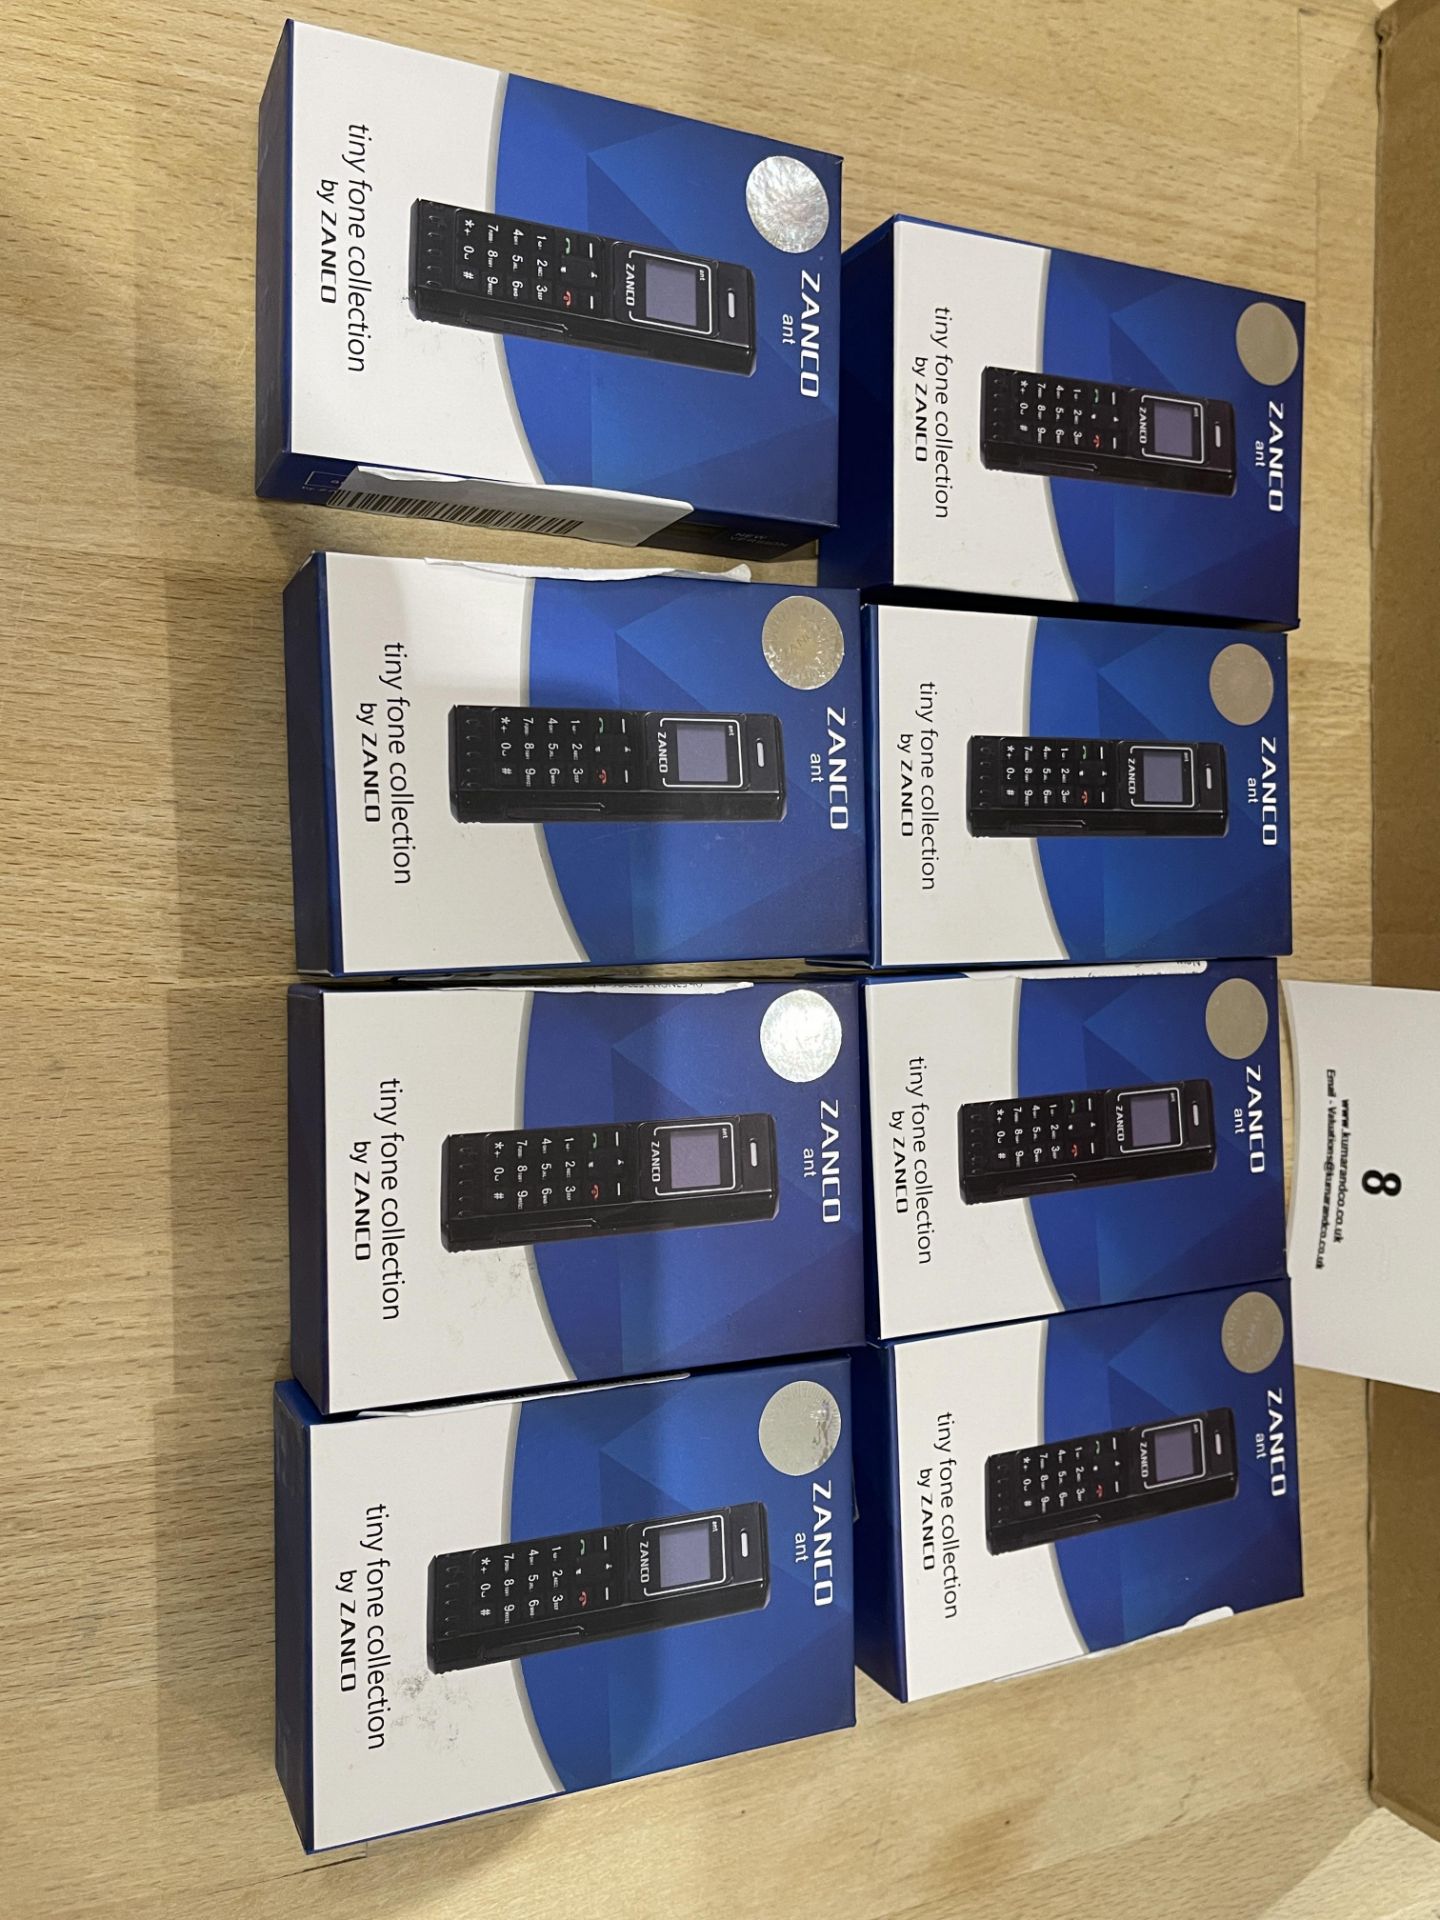 8: Zanco ANT - Tiny Phone Collection Mobile Phones, RRP £23.99 Brand New Boxed - Image 9 of 9